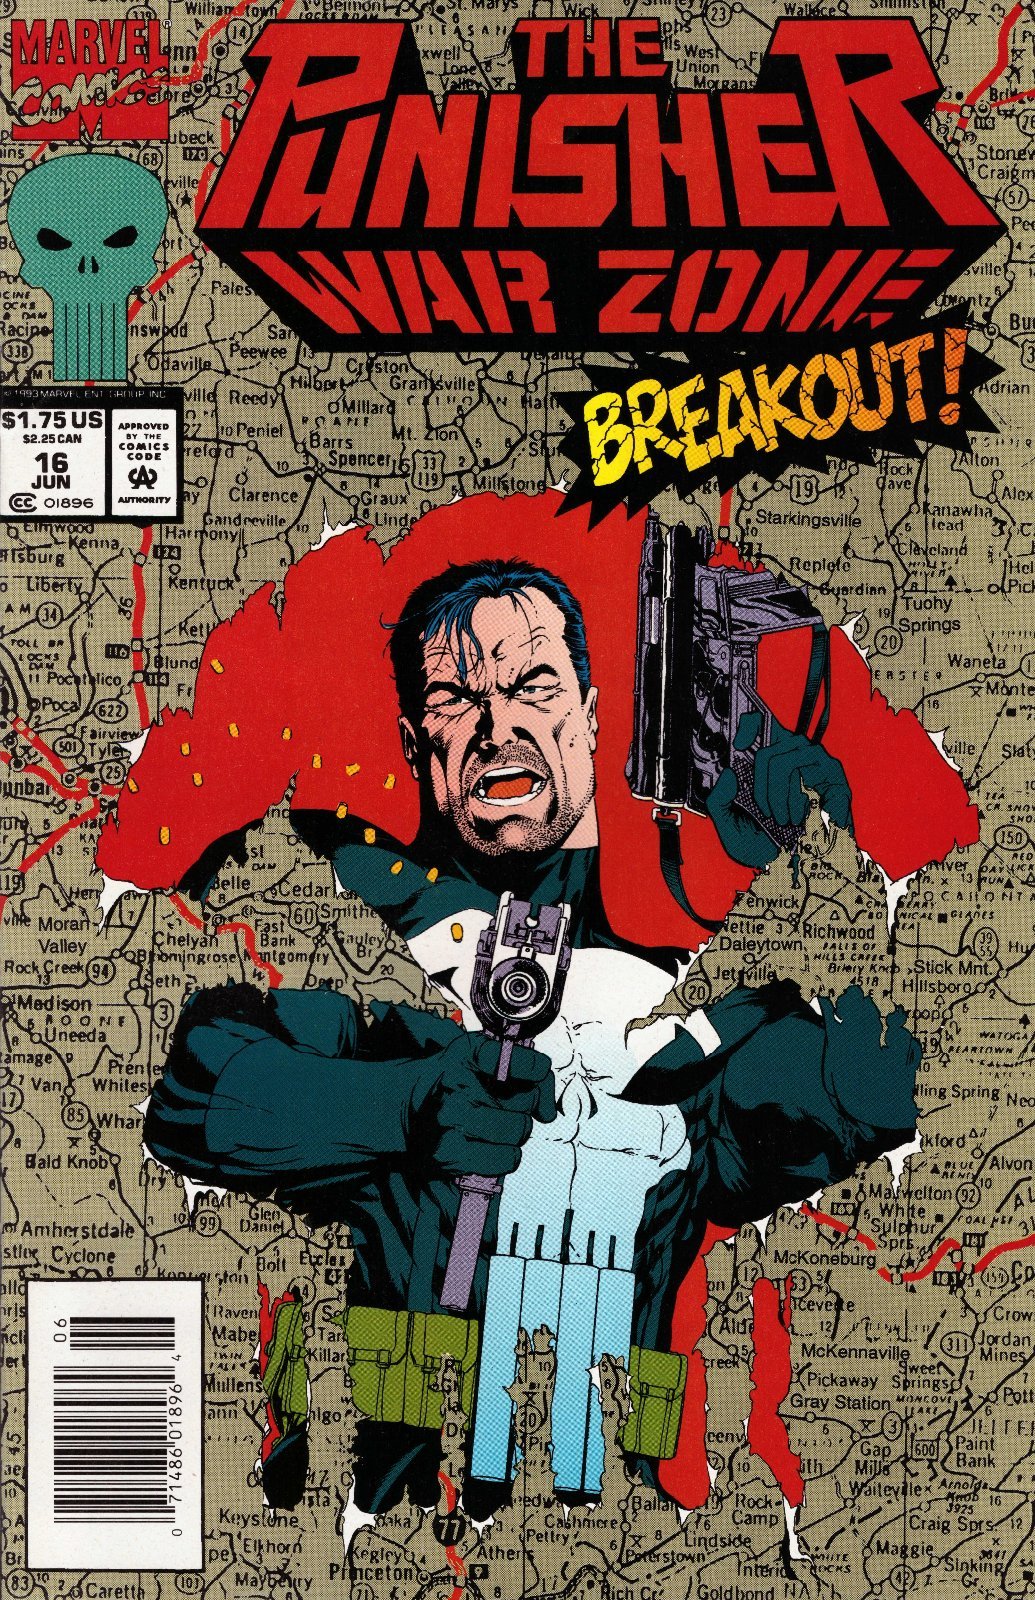 The Punisher: War Zone #16 Newsstand Cover (1992-1995) Marvel